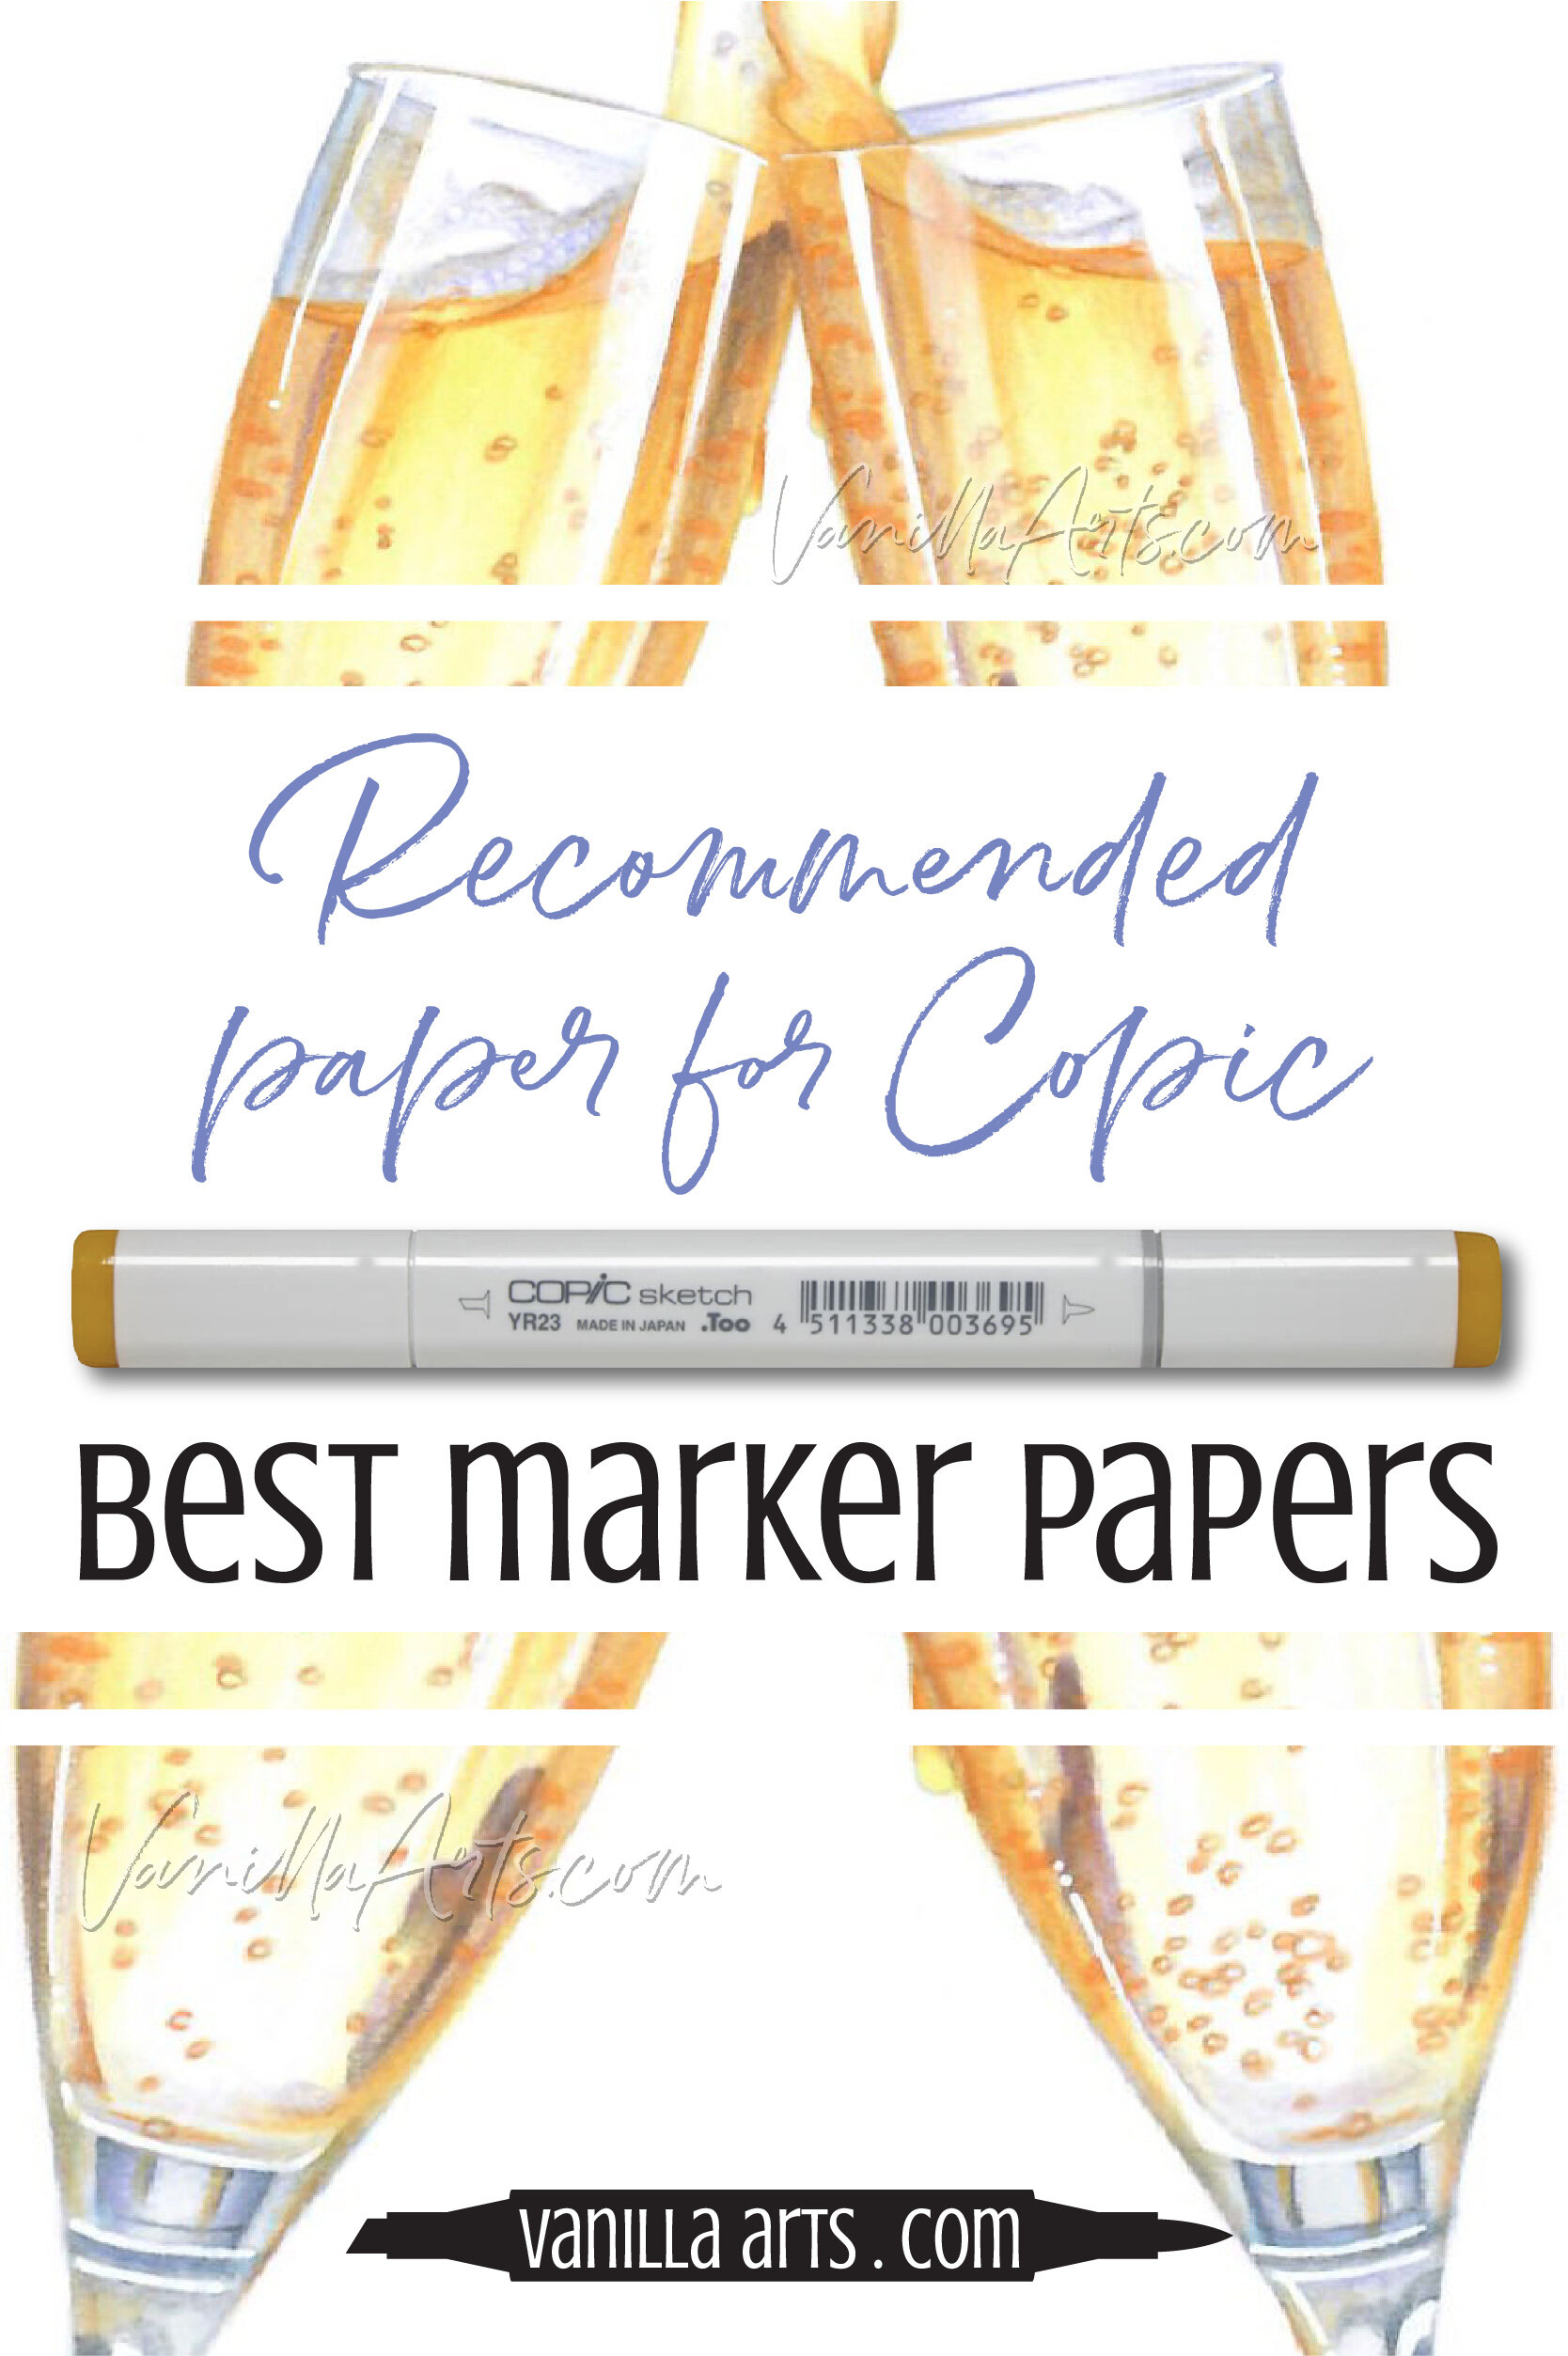 Bond Paper Vs Others: Need Special Paper For Alcohol Markers? - Supply DIY